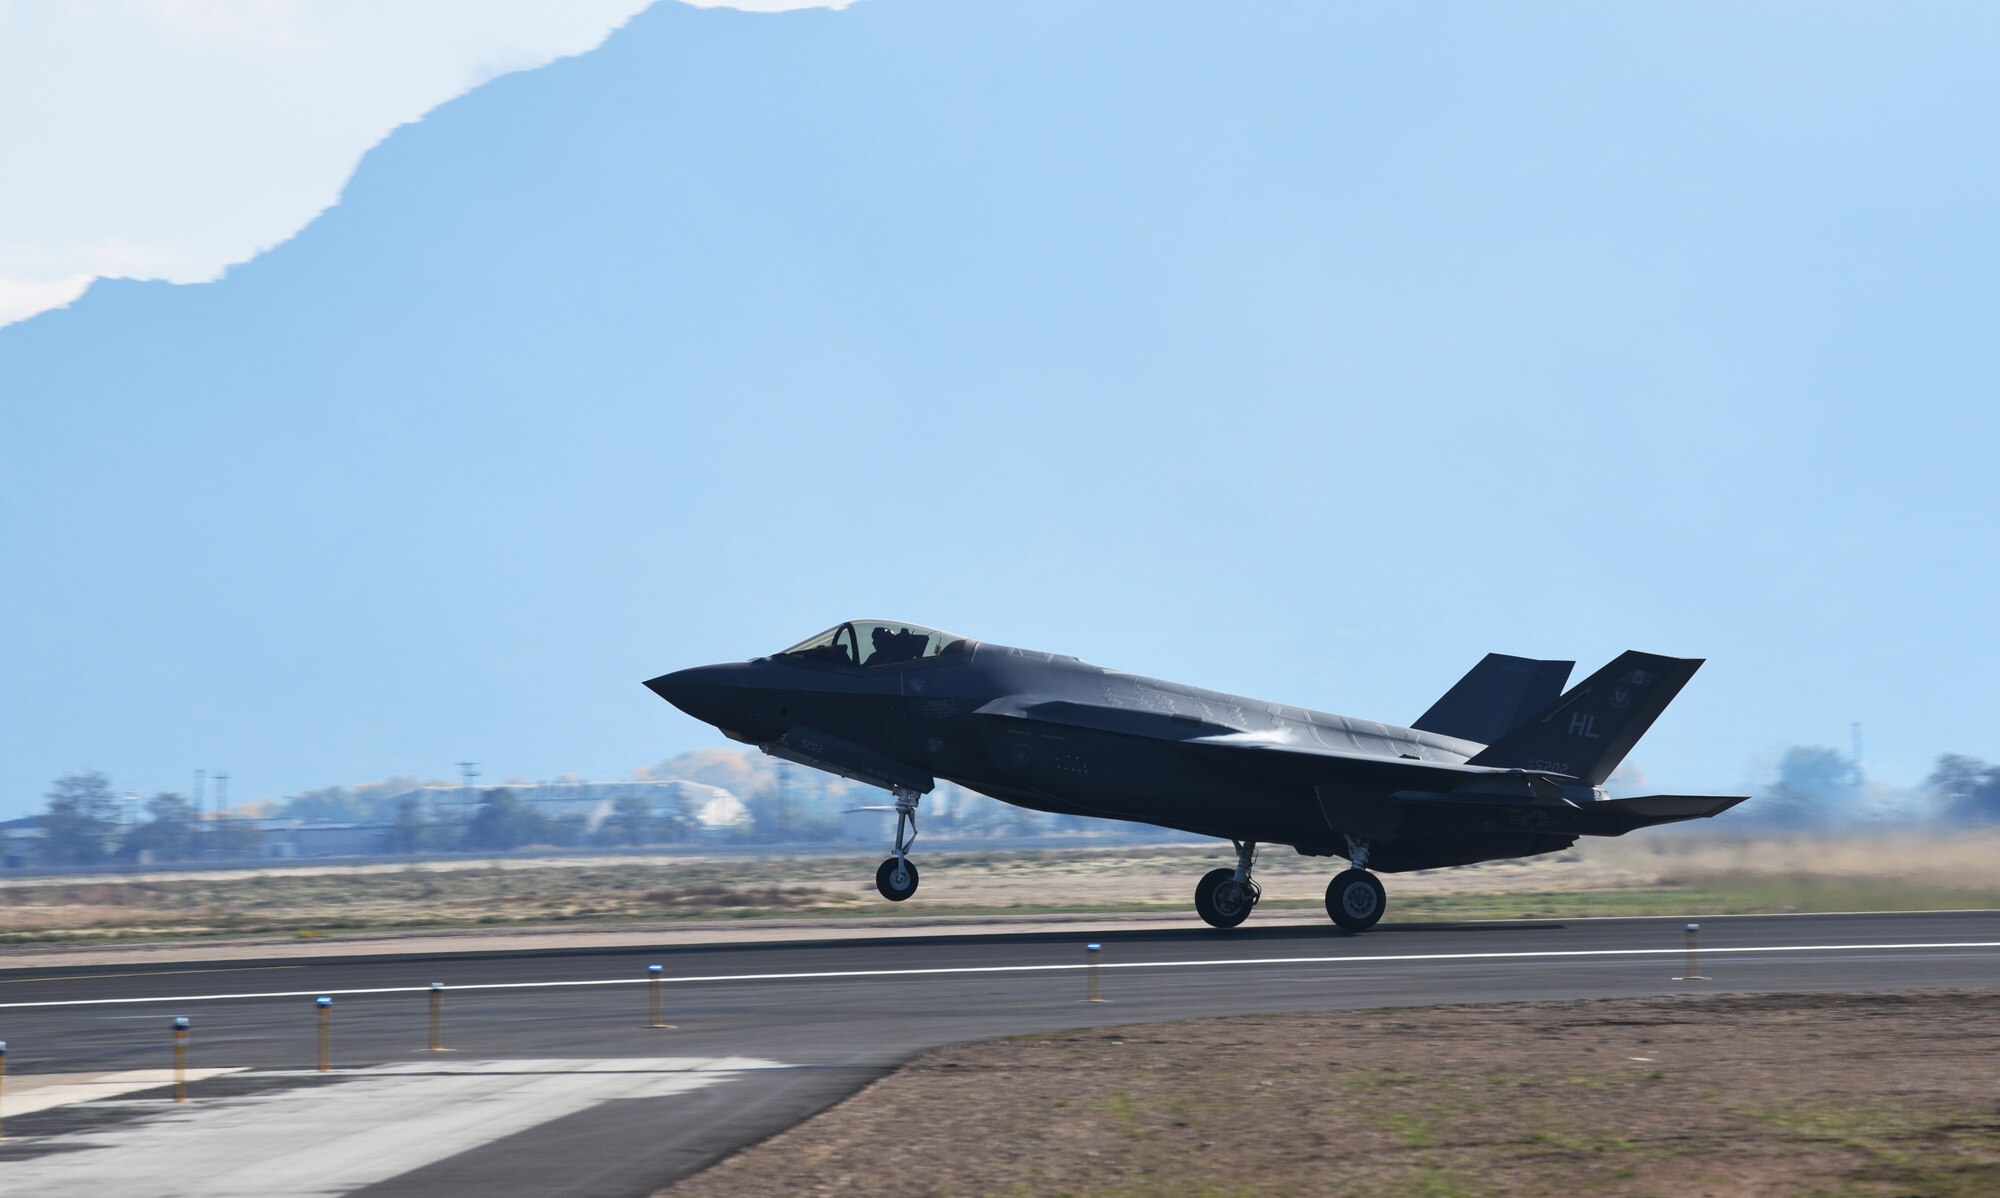 An F-35A Lightning II takes off from Hill Air Force Base, Utah. Make-A-Wish children visited the 388th Fighter Wing where they spent the day learning what it's like to be a pilot. They received flight suits, name tapes, patches, and wings. (U.S. Air Force photo by Micah Garbarino)